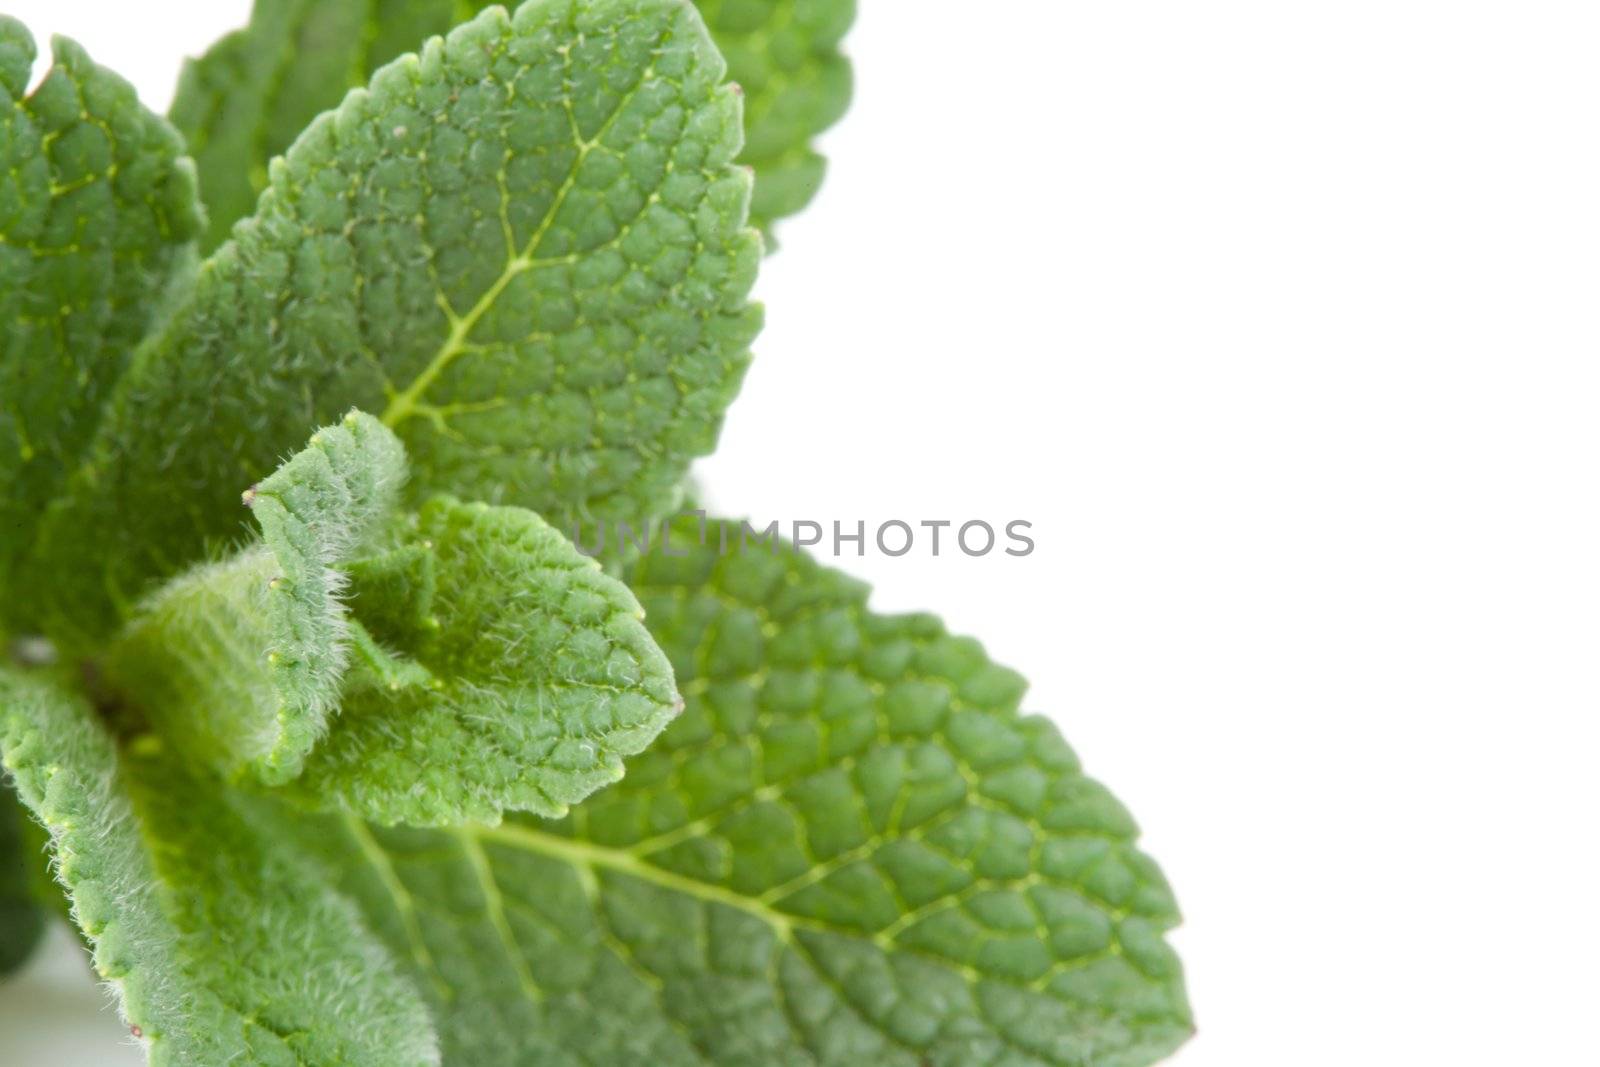 Extreme close up of mint against a white background